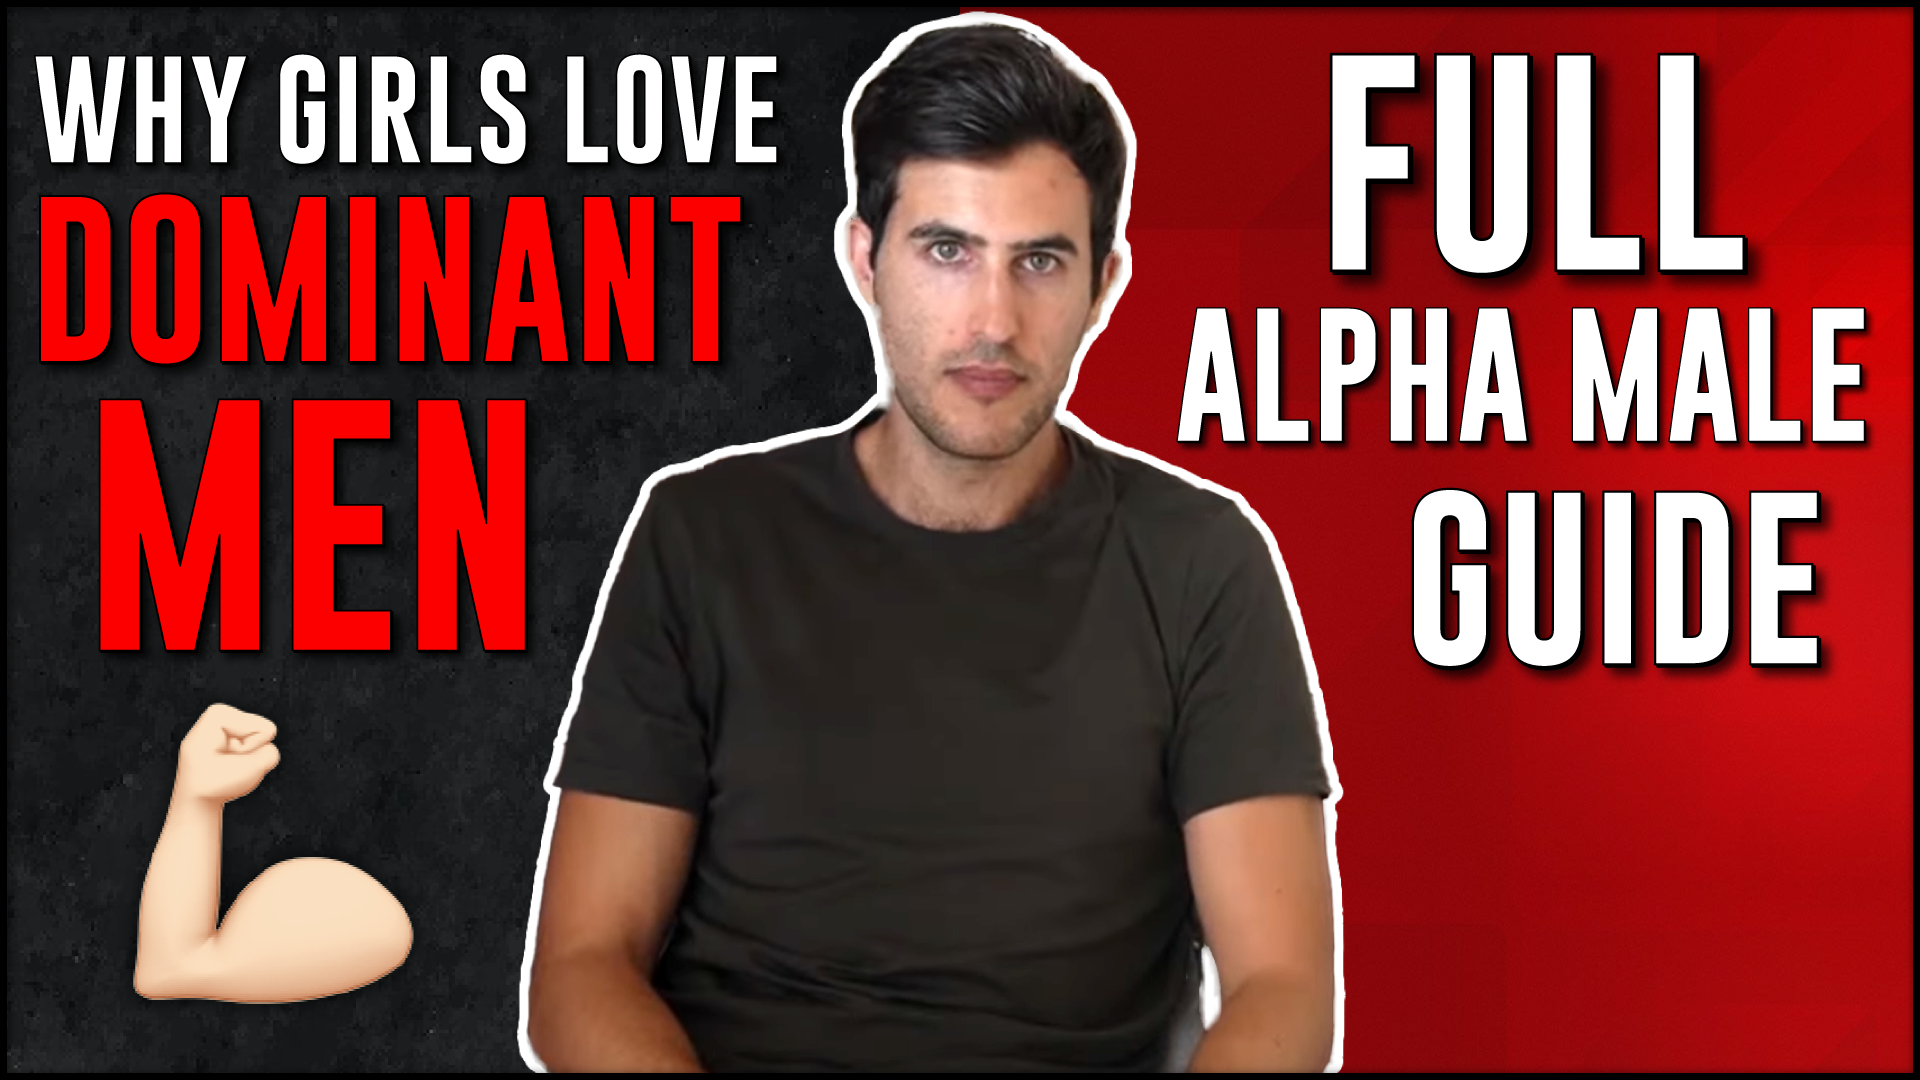 Why Girls Love Dominant Alpha Males?